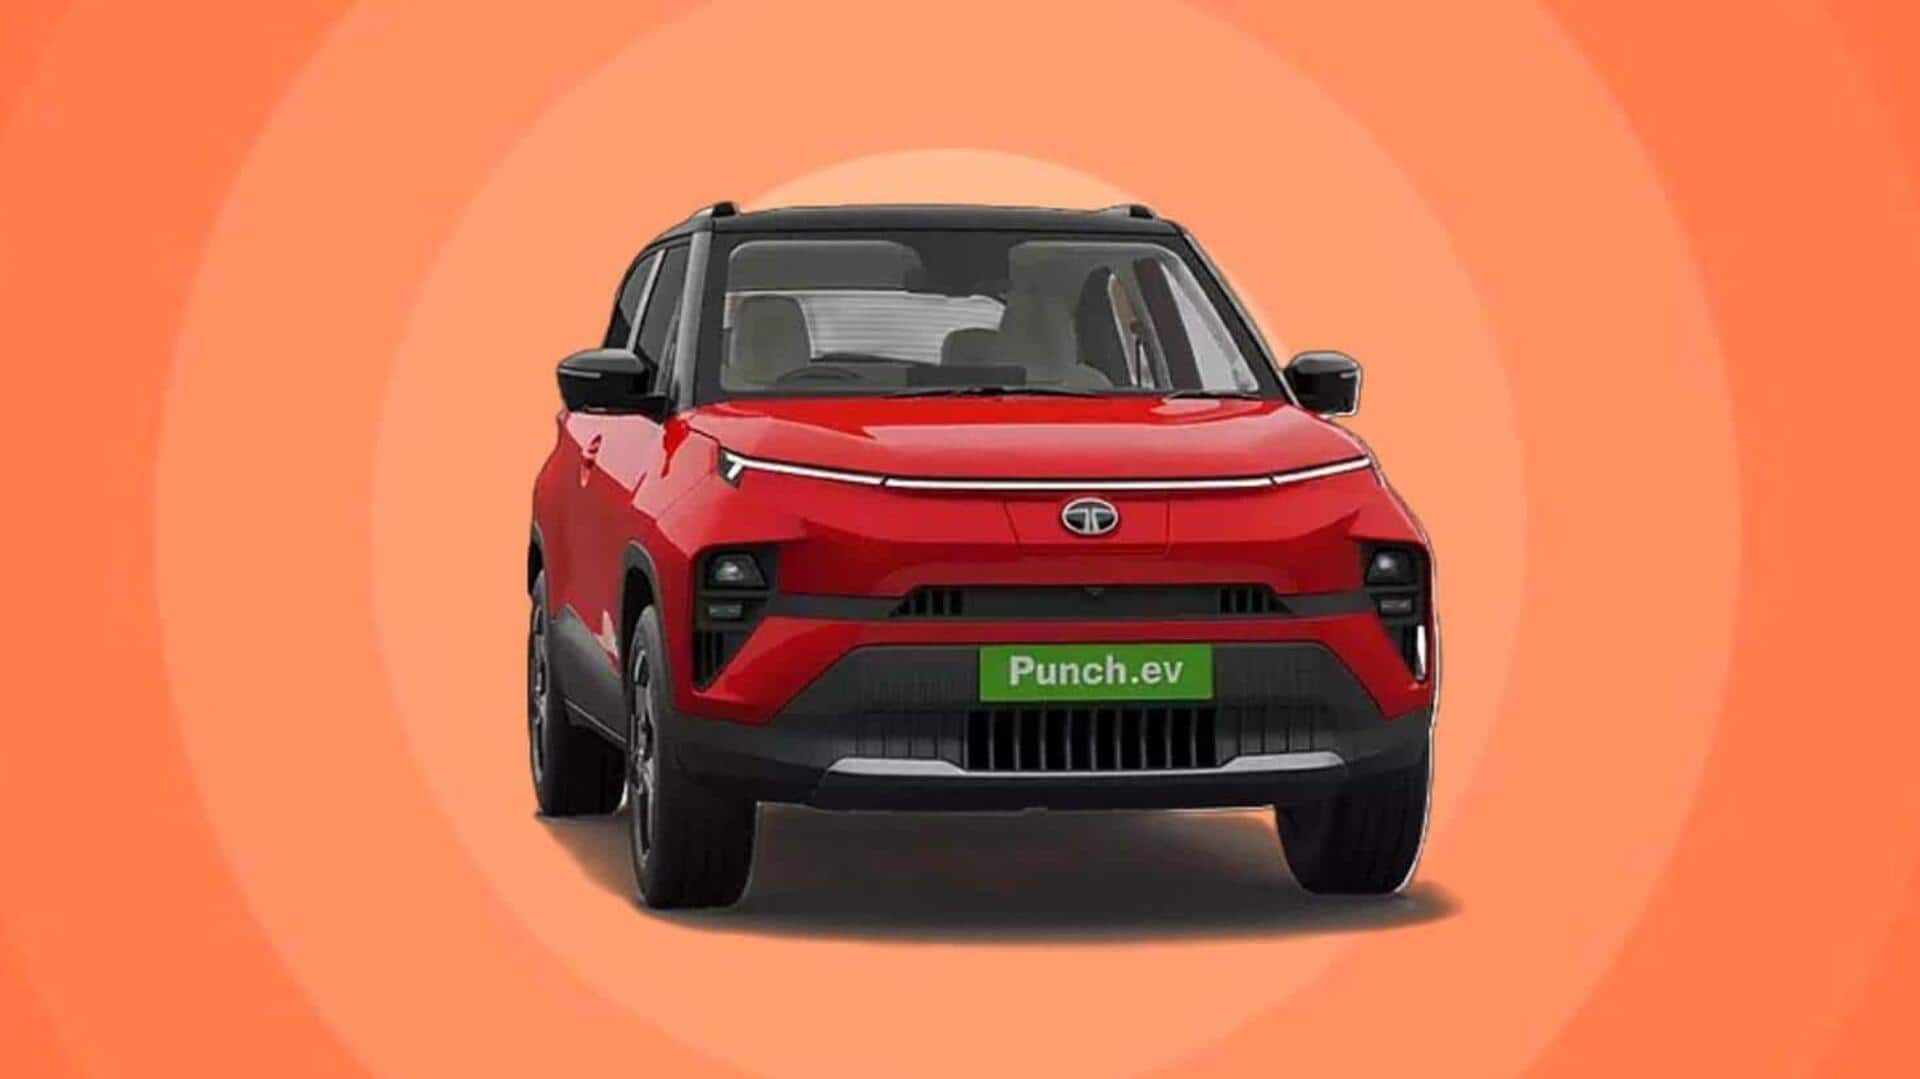 Tata Punch.ev launching tomorrow in India: What to expect